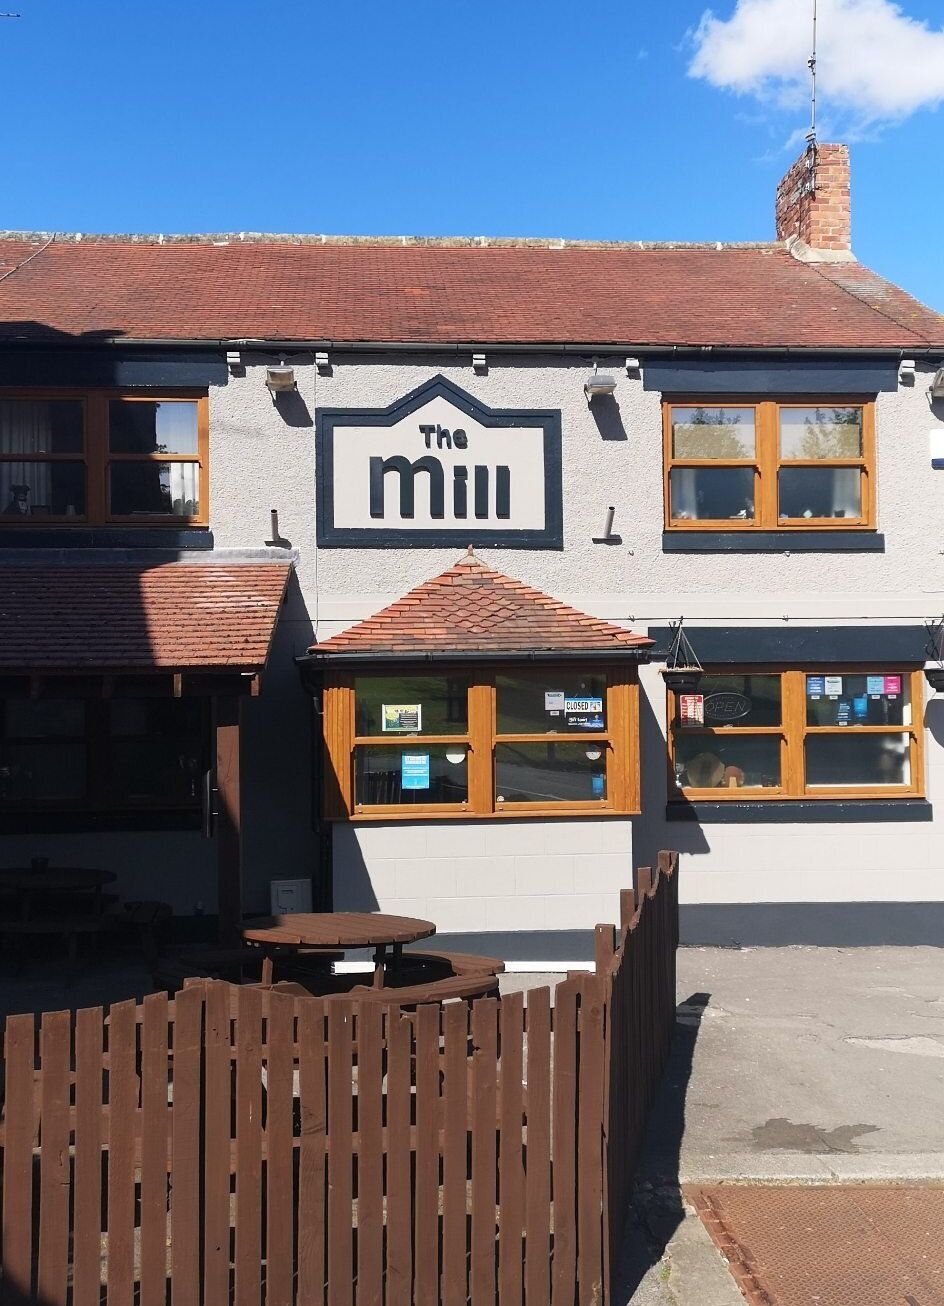 Les Scott runs The Mill House in County Durham and fears he will have to turn loyal customers away under the new rules which will reduce the pub's capacity